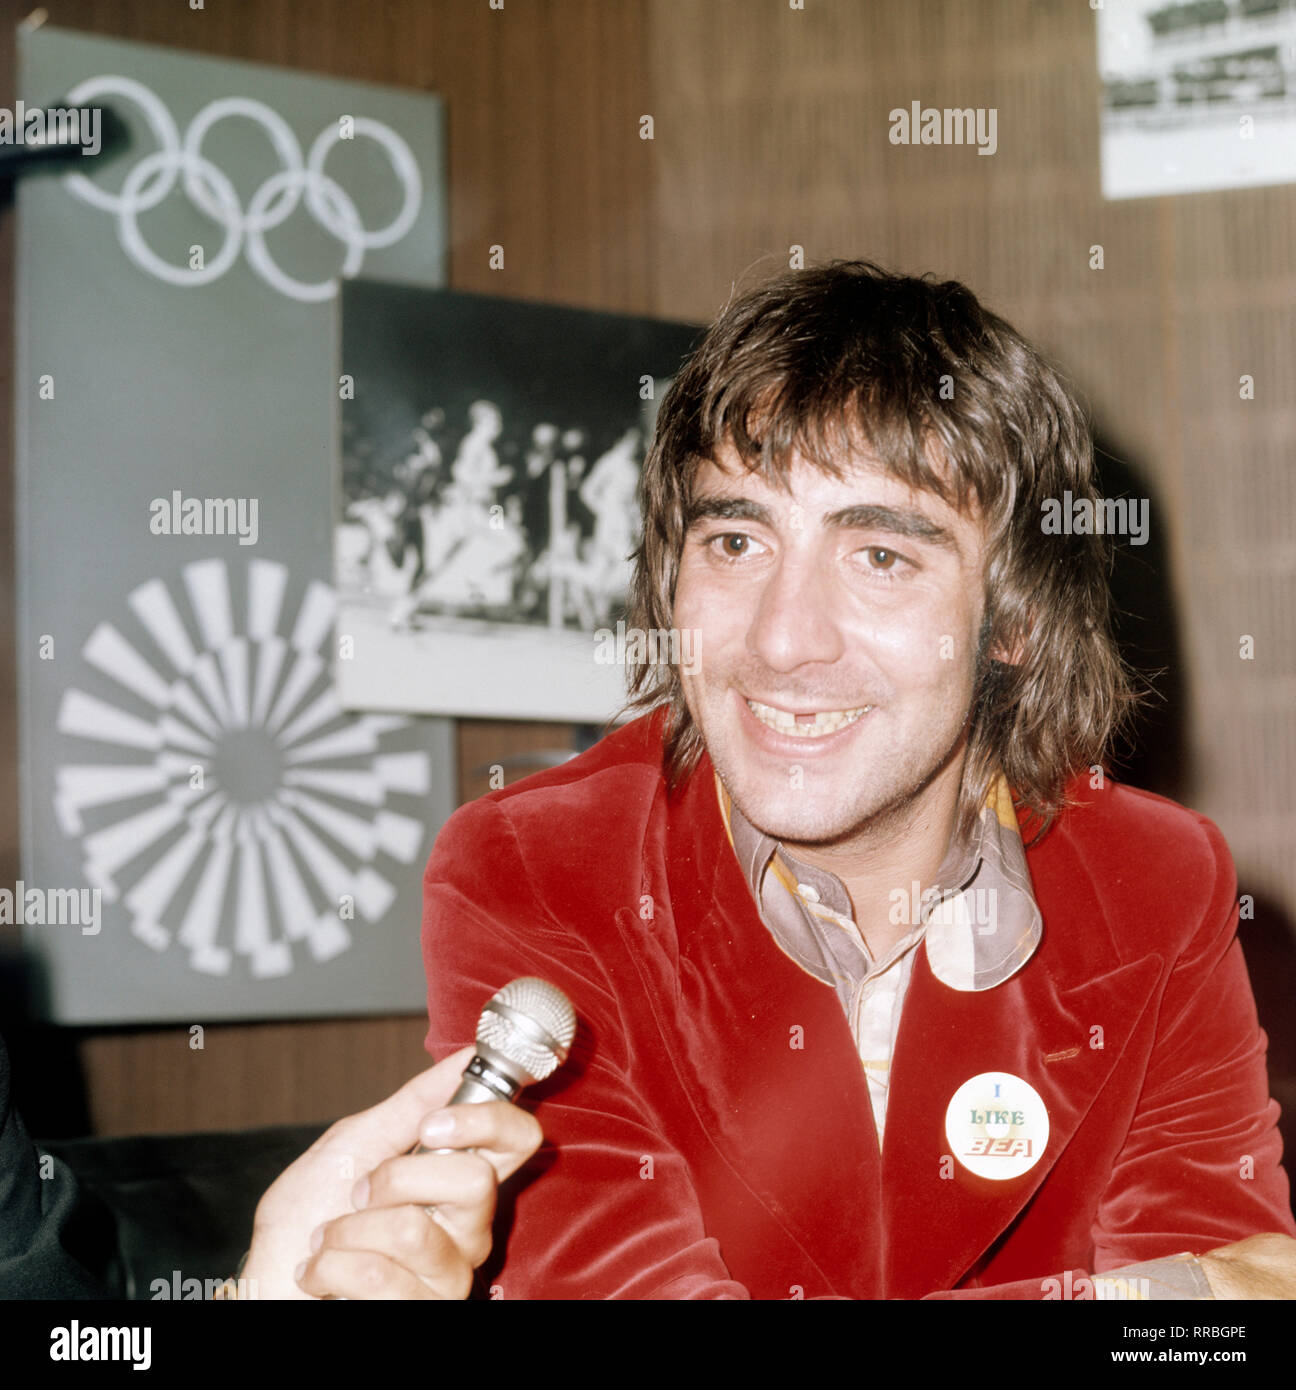 The Who - Keith Moon (1946-1978), British Rock Musician, The Who, Drummer, Portrait (1970s) / Überschrift: The Who Stock Photo